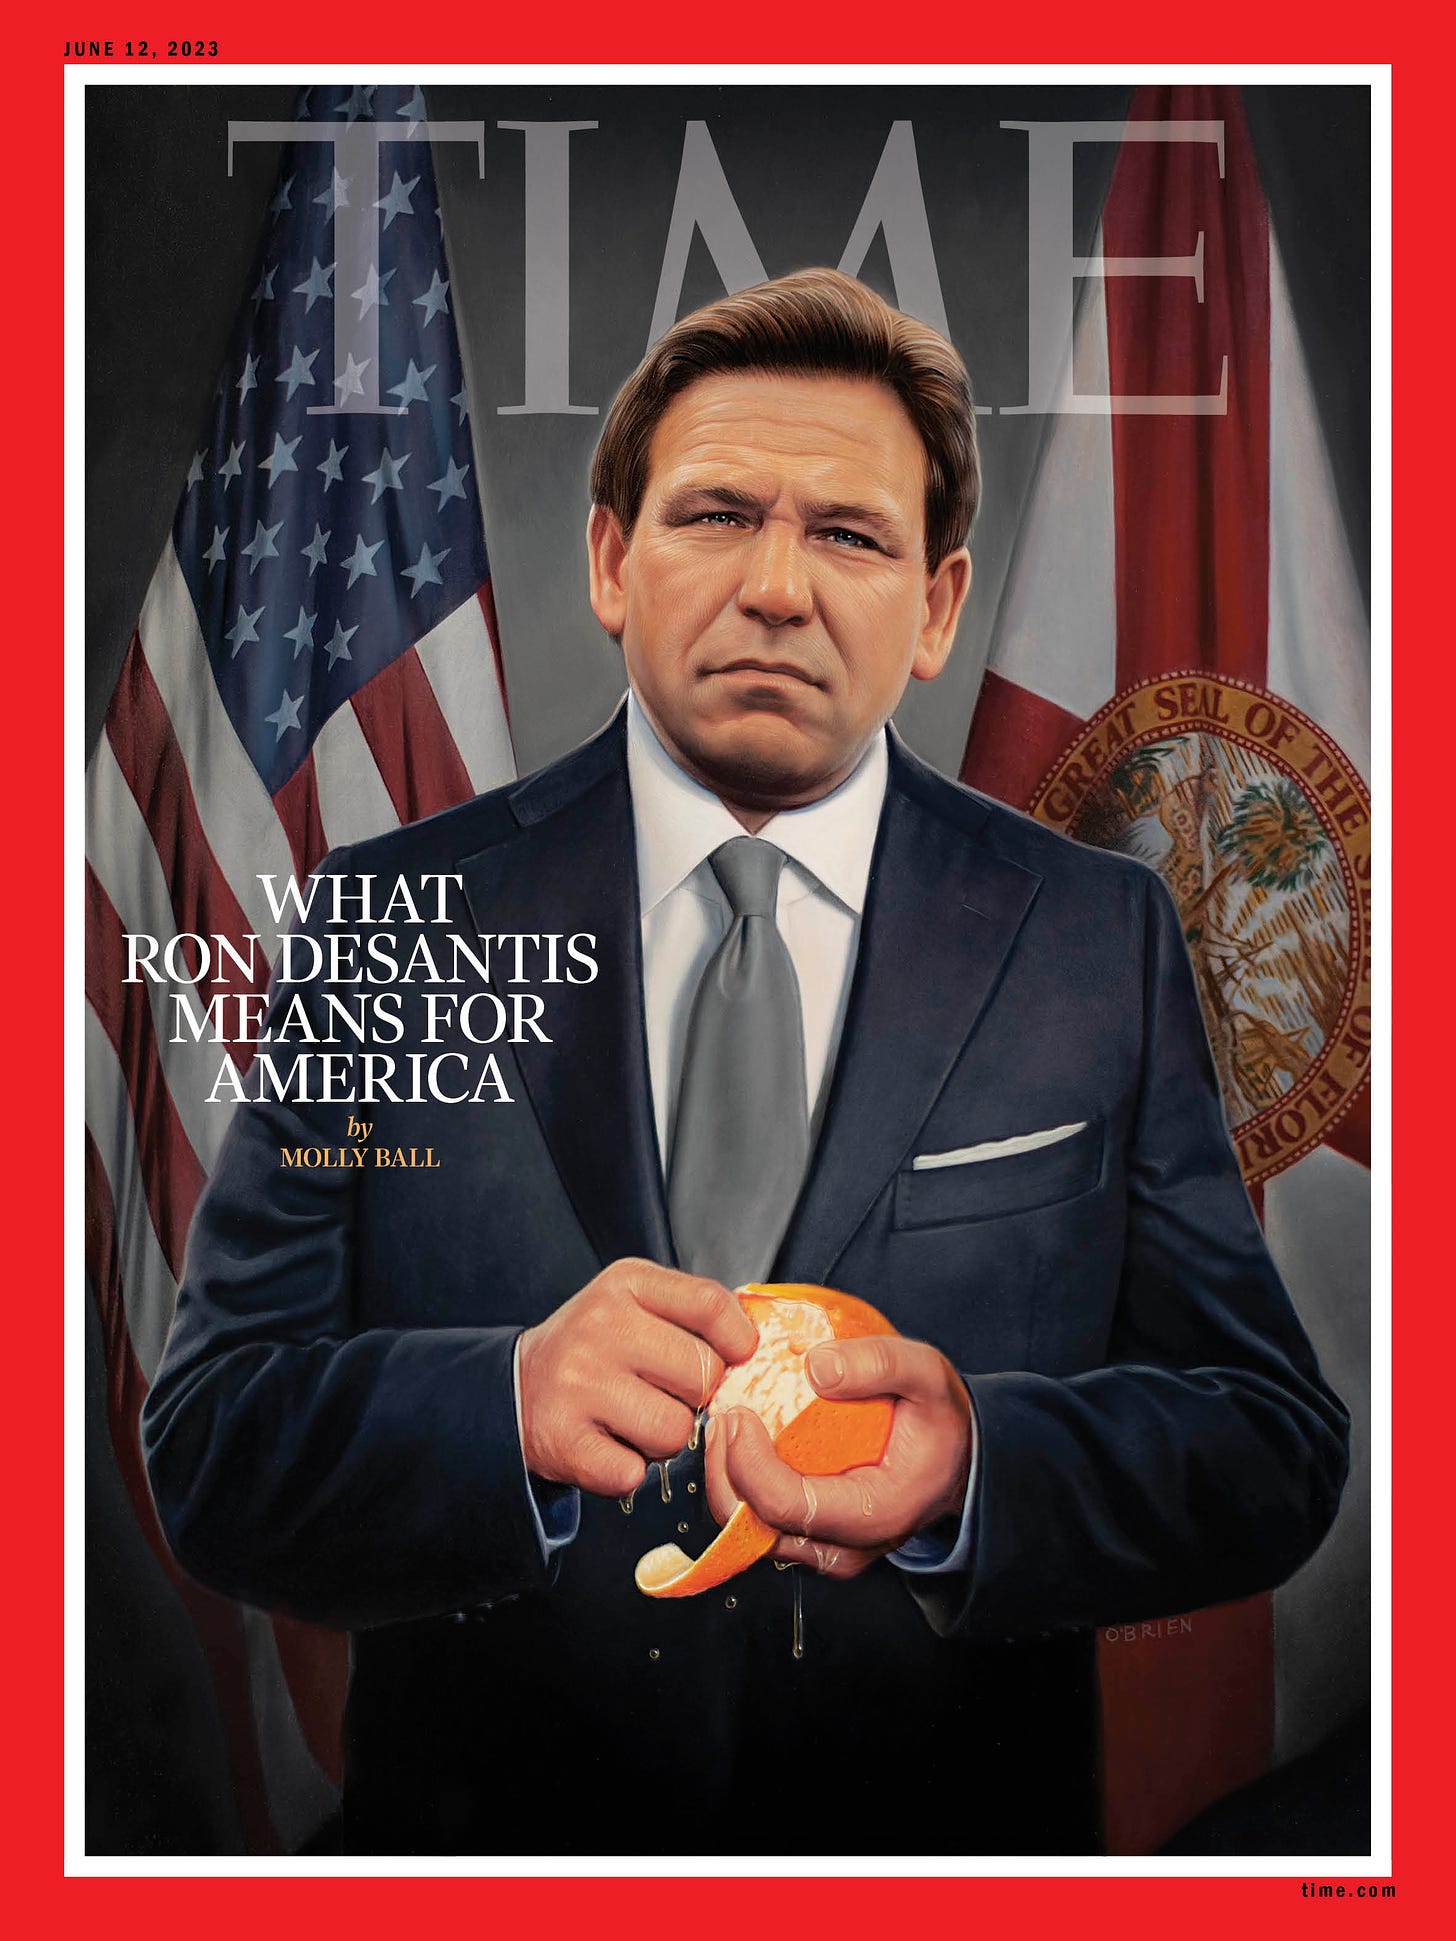 What Ron DeSantis' Florida Agenda Could Mean for America | Time